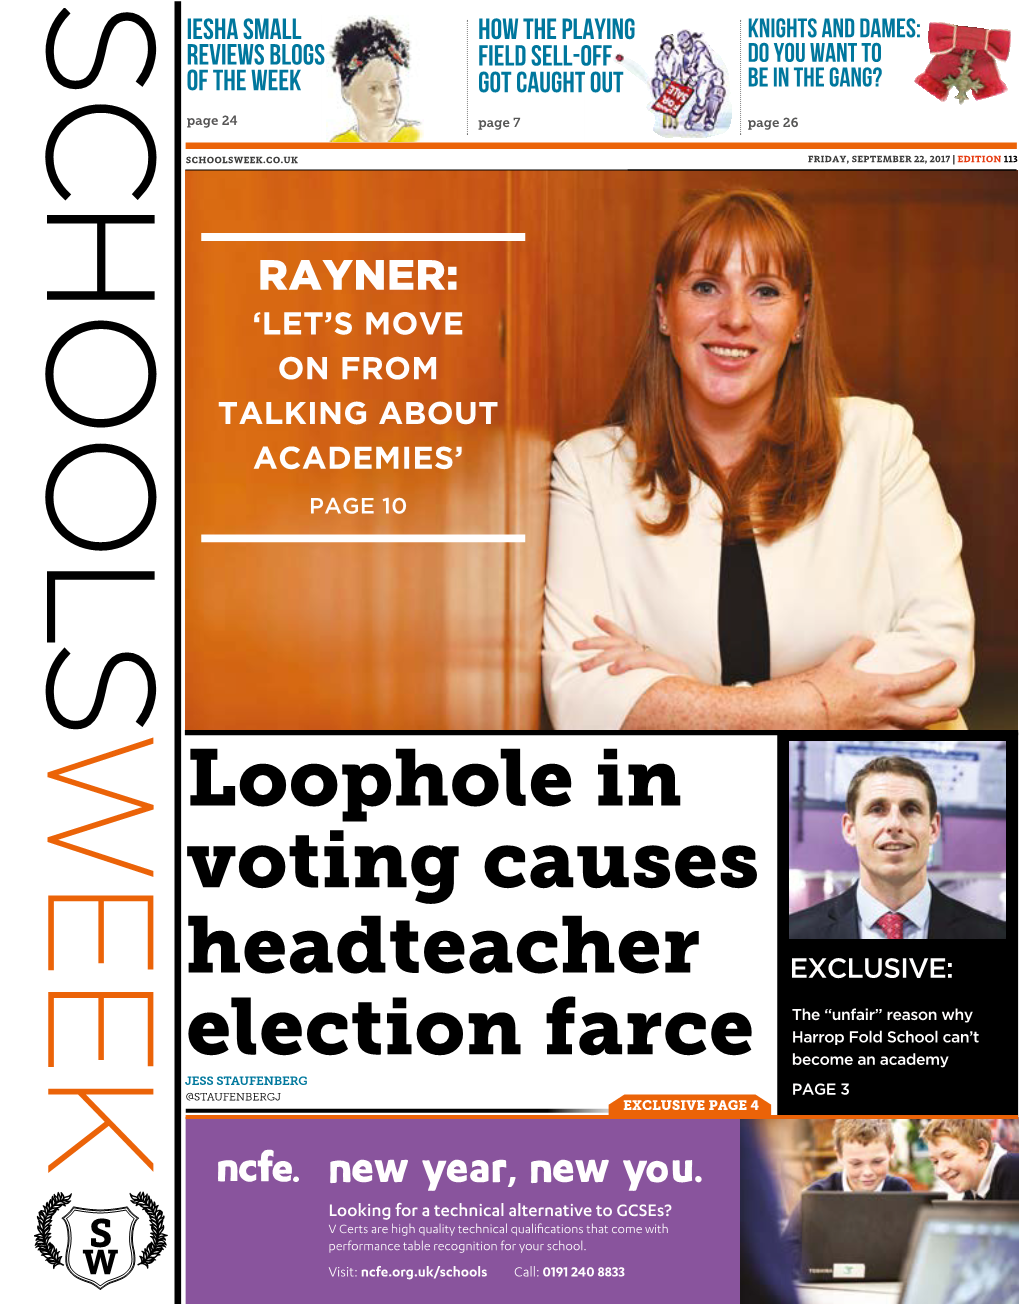 Loophole in Voting Causes Headteacher Election Farce